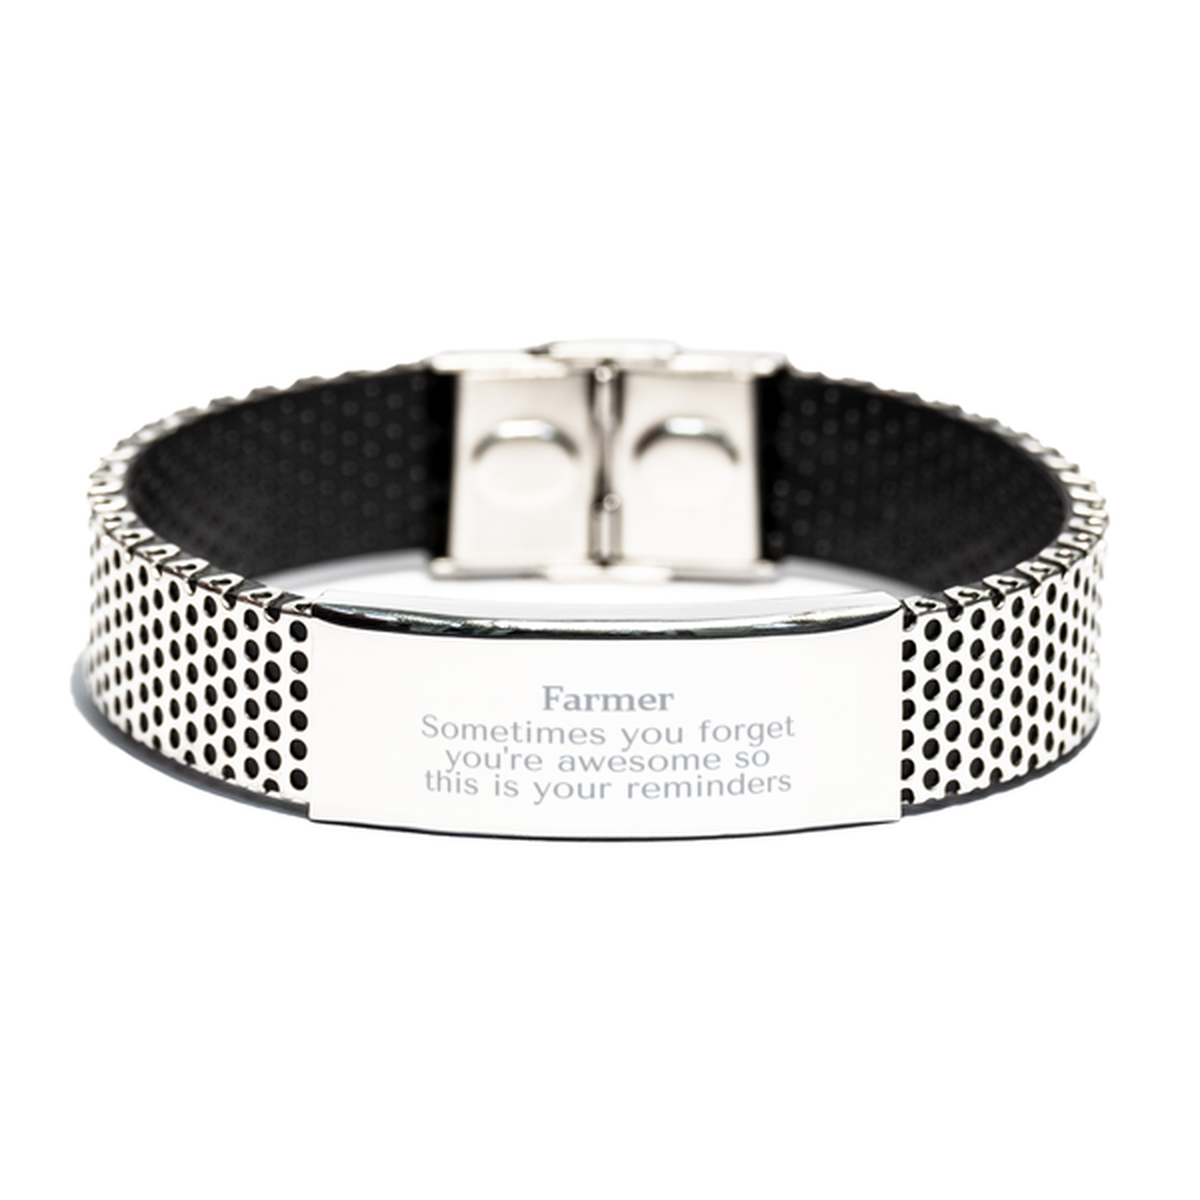 Sentimental Farmer Stainless Steel Bracelet, Farmer Sometimes you forget you're awesome so this is your reminders, Graduation Christmas Birthday Gifts for Farmer, Men, Women, Coworkers